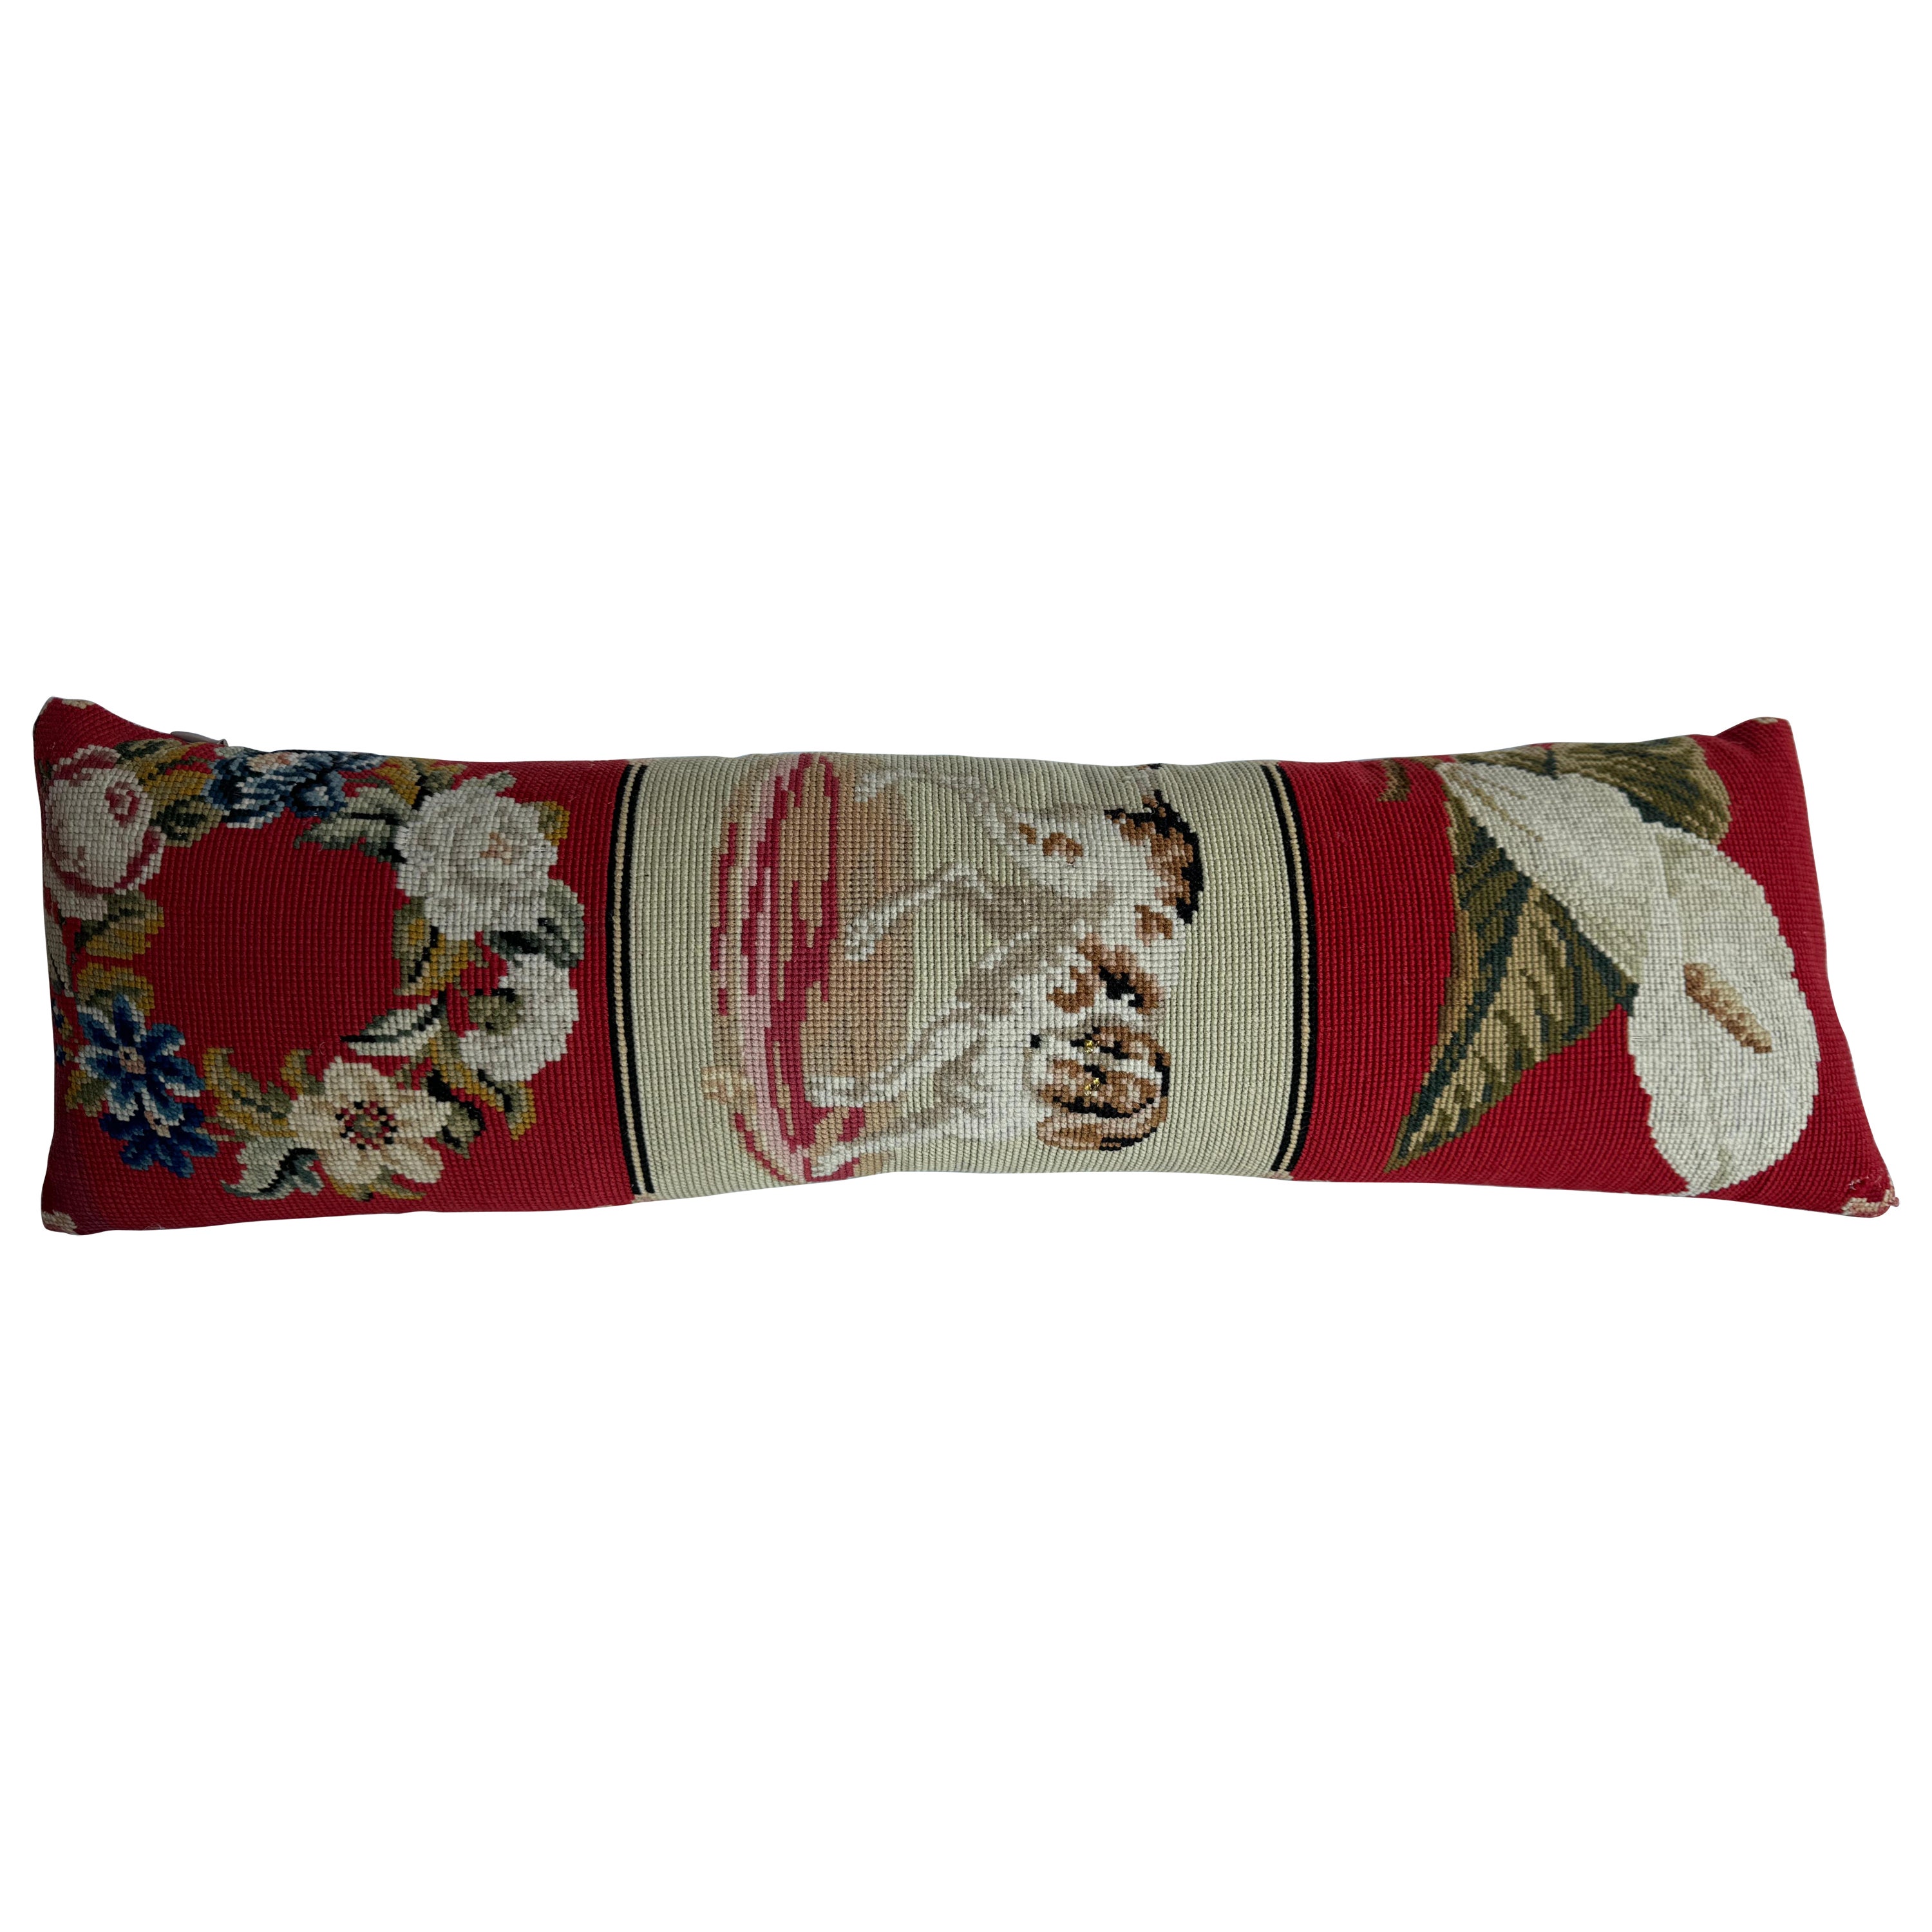 1850 English Needle Work Pillow - 24"X7" For Sale